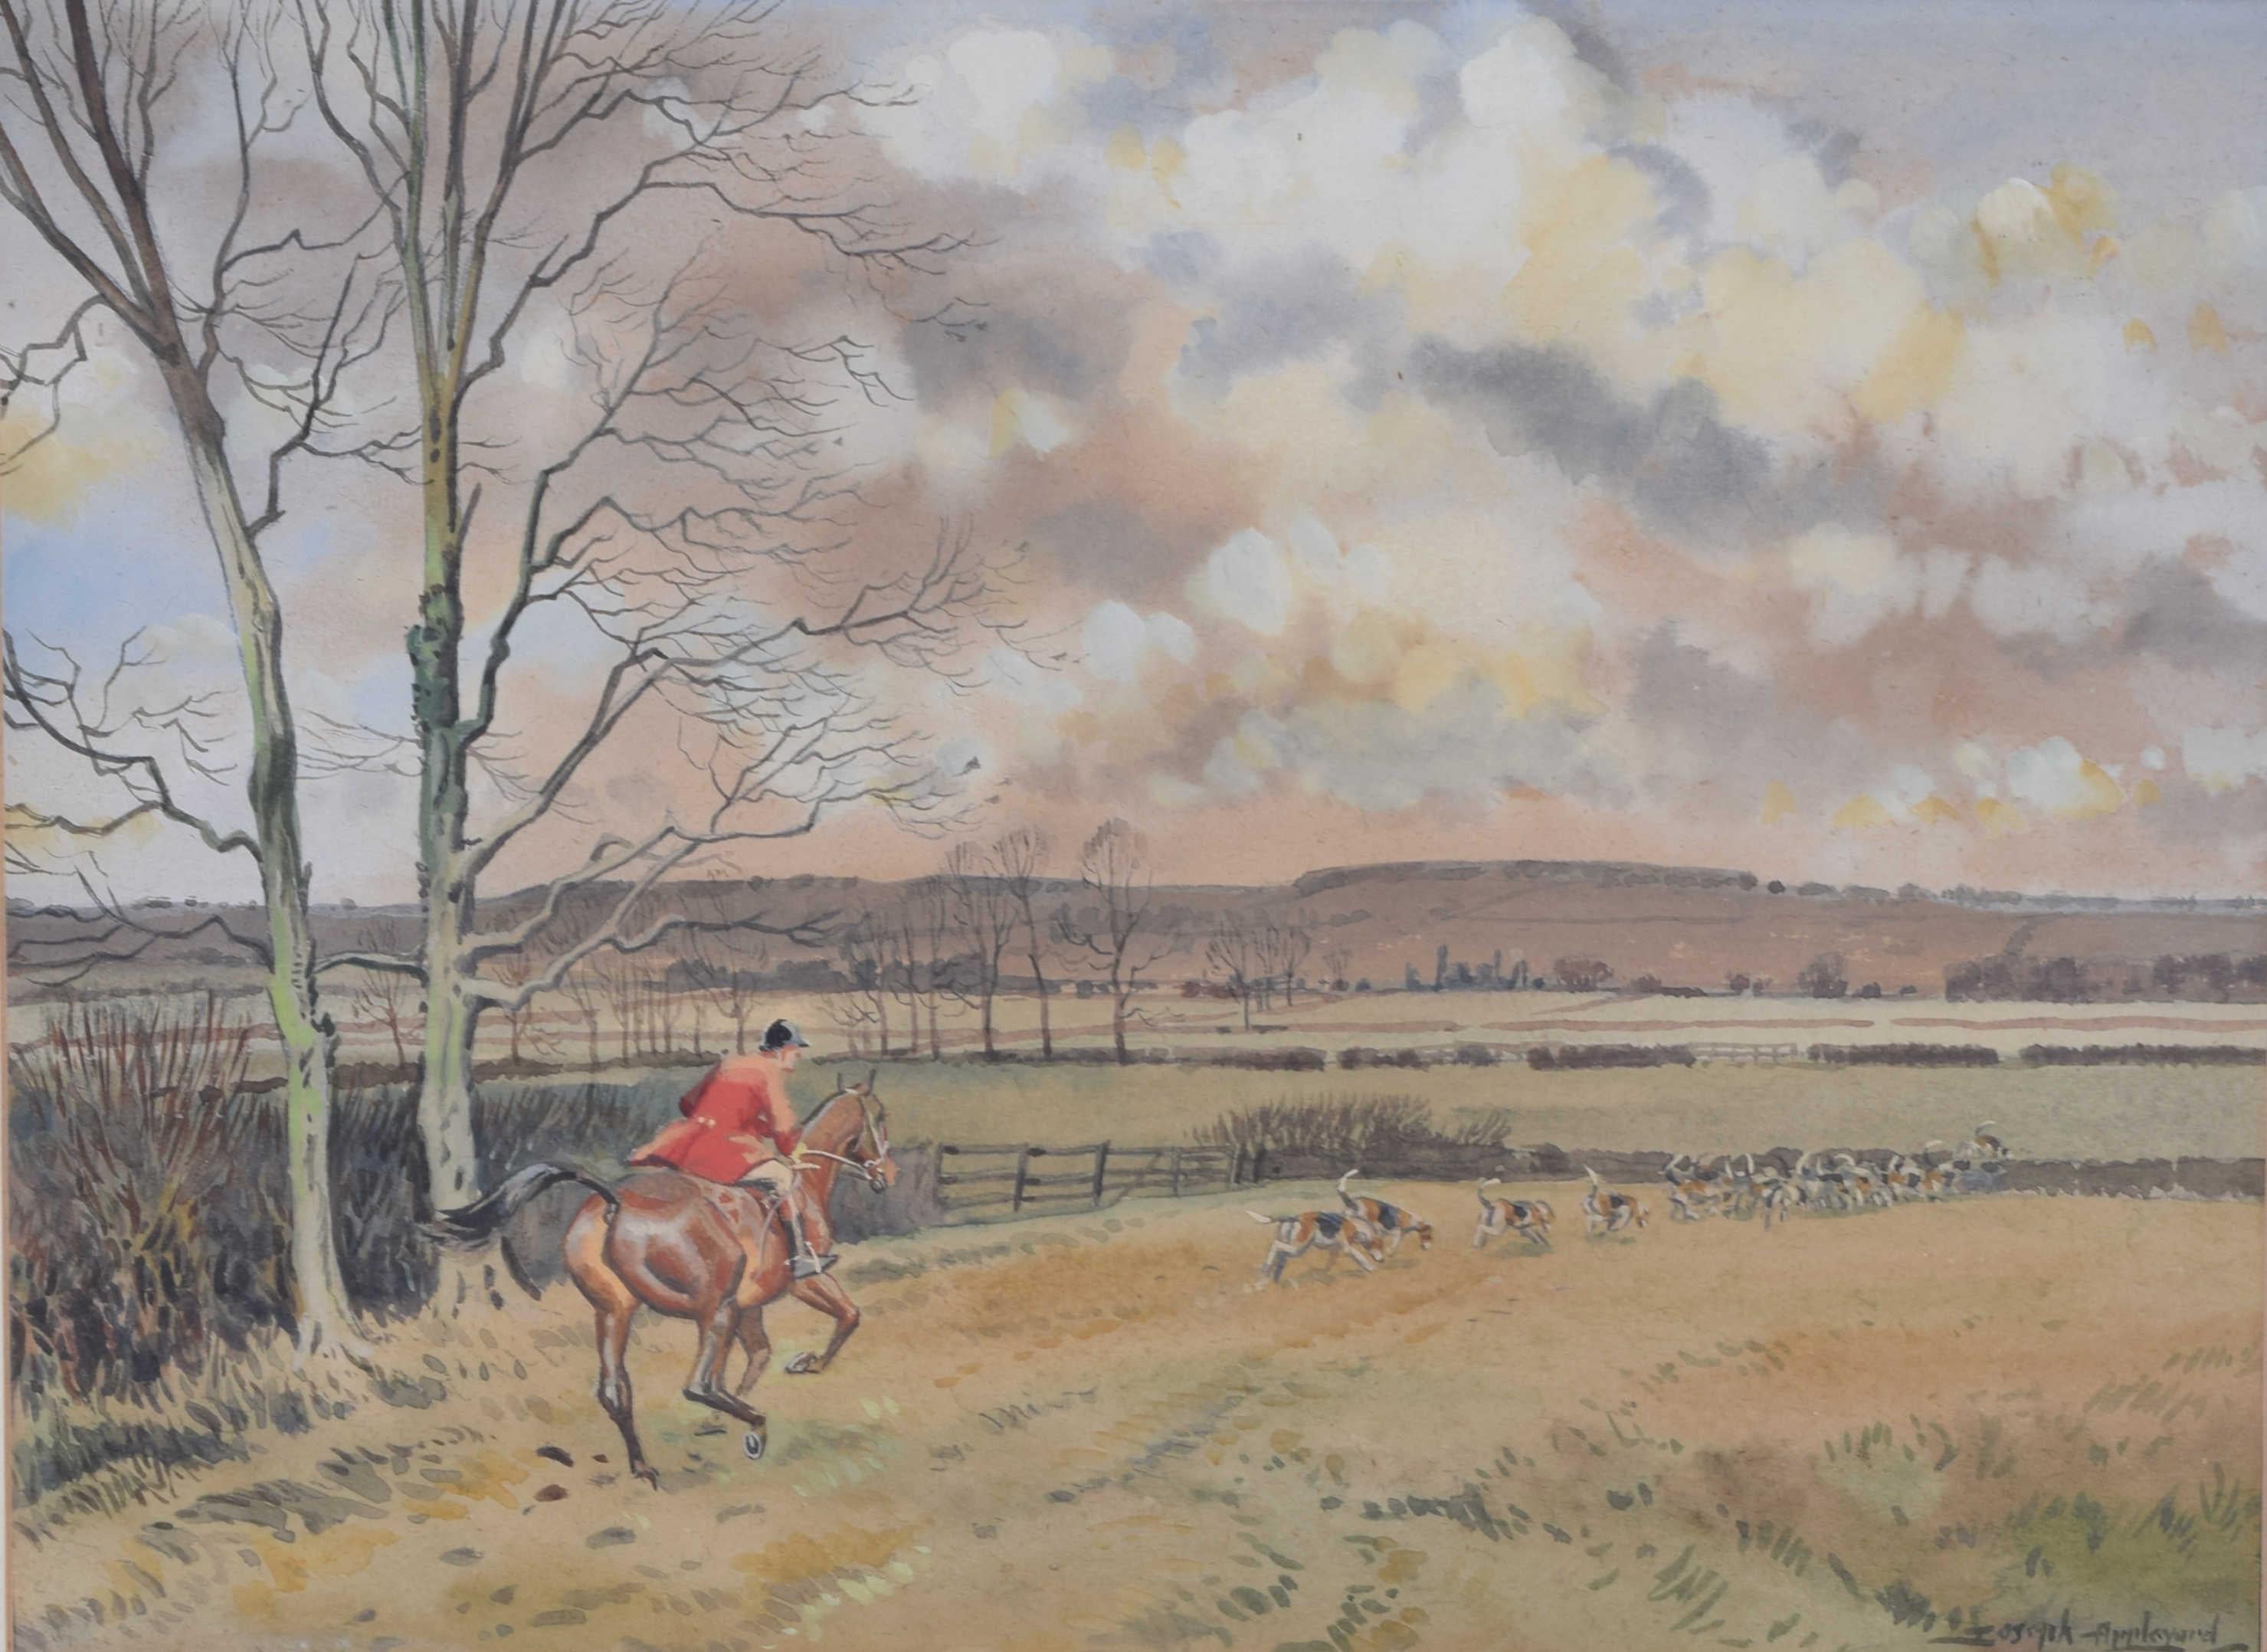 To see more, scroll down to "More from this Seller" and below it click on "See all from this Seller." 

John Appleyard (1908 - 1960)
The Middleton Hunt at Sherriff Hutton 
Watercolour
28 x 37 cm

Signed lower right.

The Huntsman and hounds of North